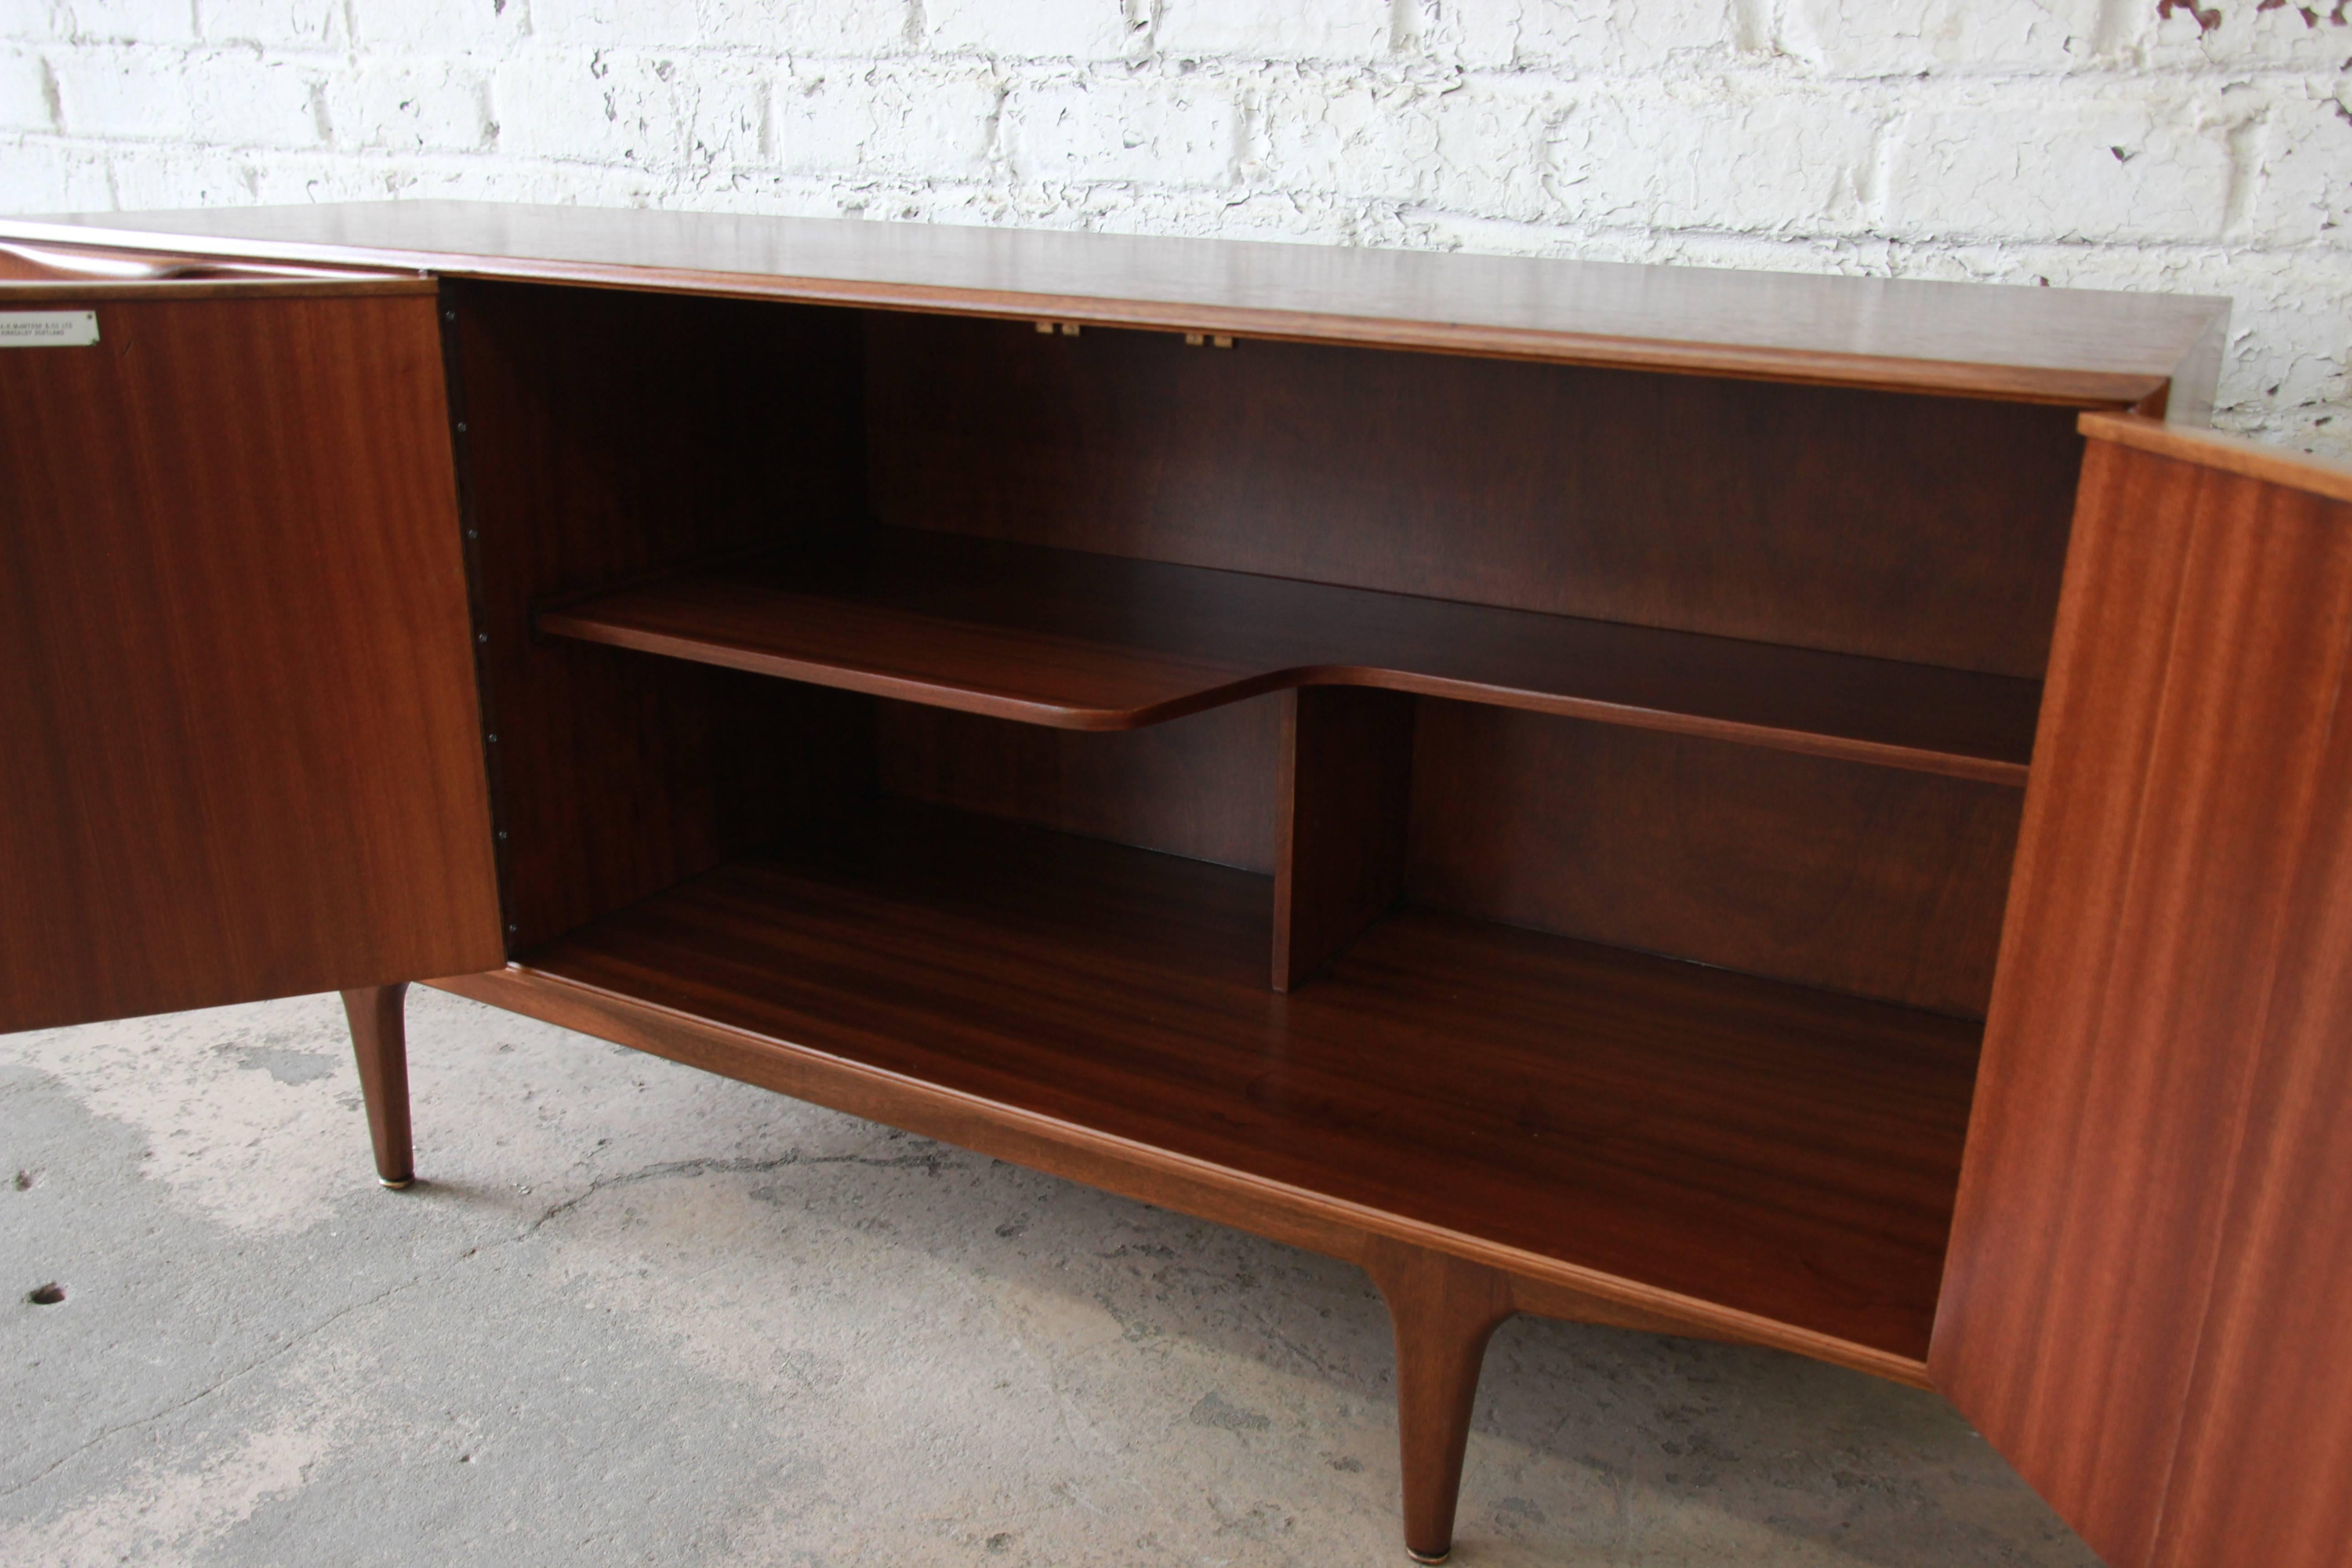 Mid-20th Century Mid-Century Modern Teak Sideboard Credenza by Tom Robertson for A.H. McIntosh